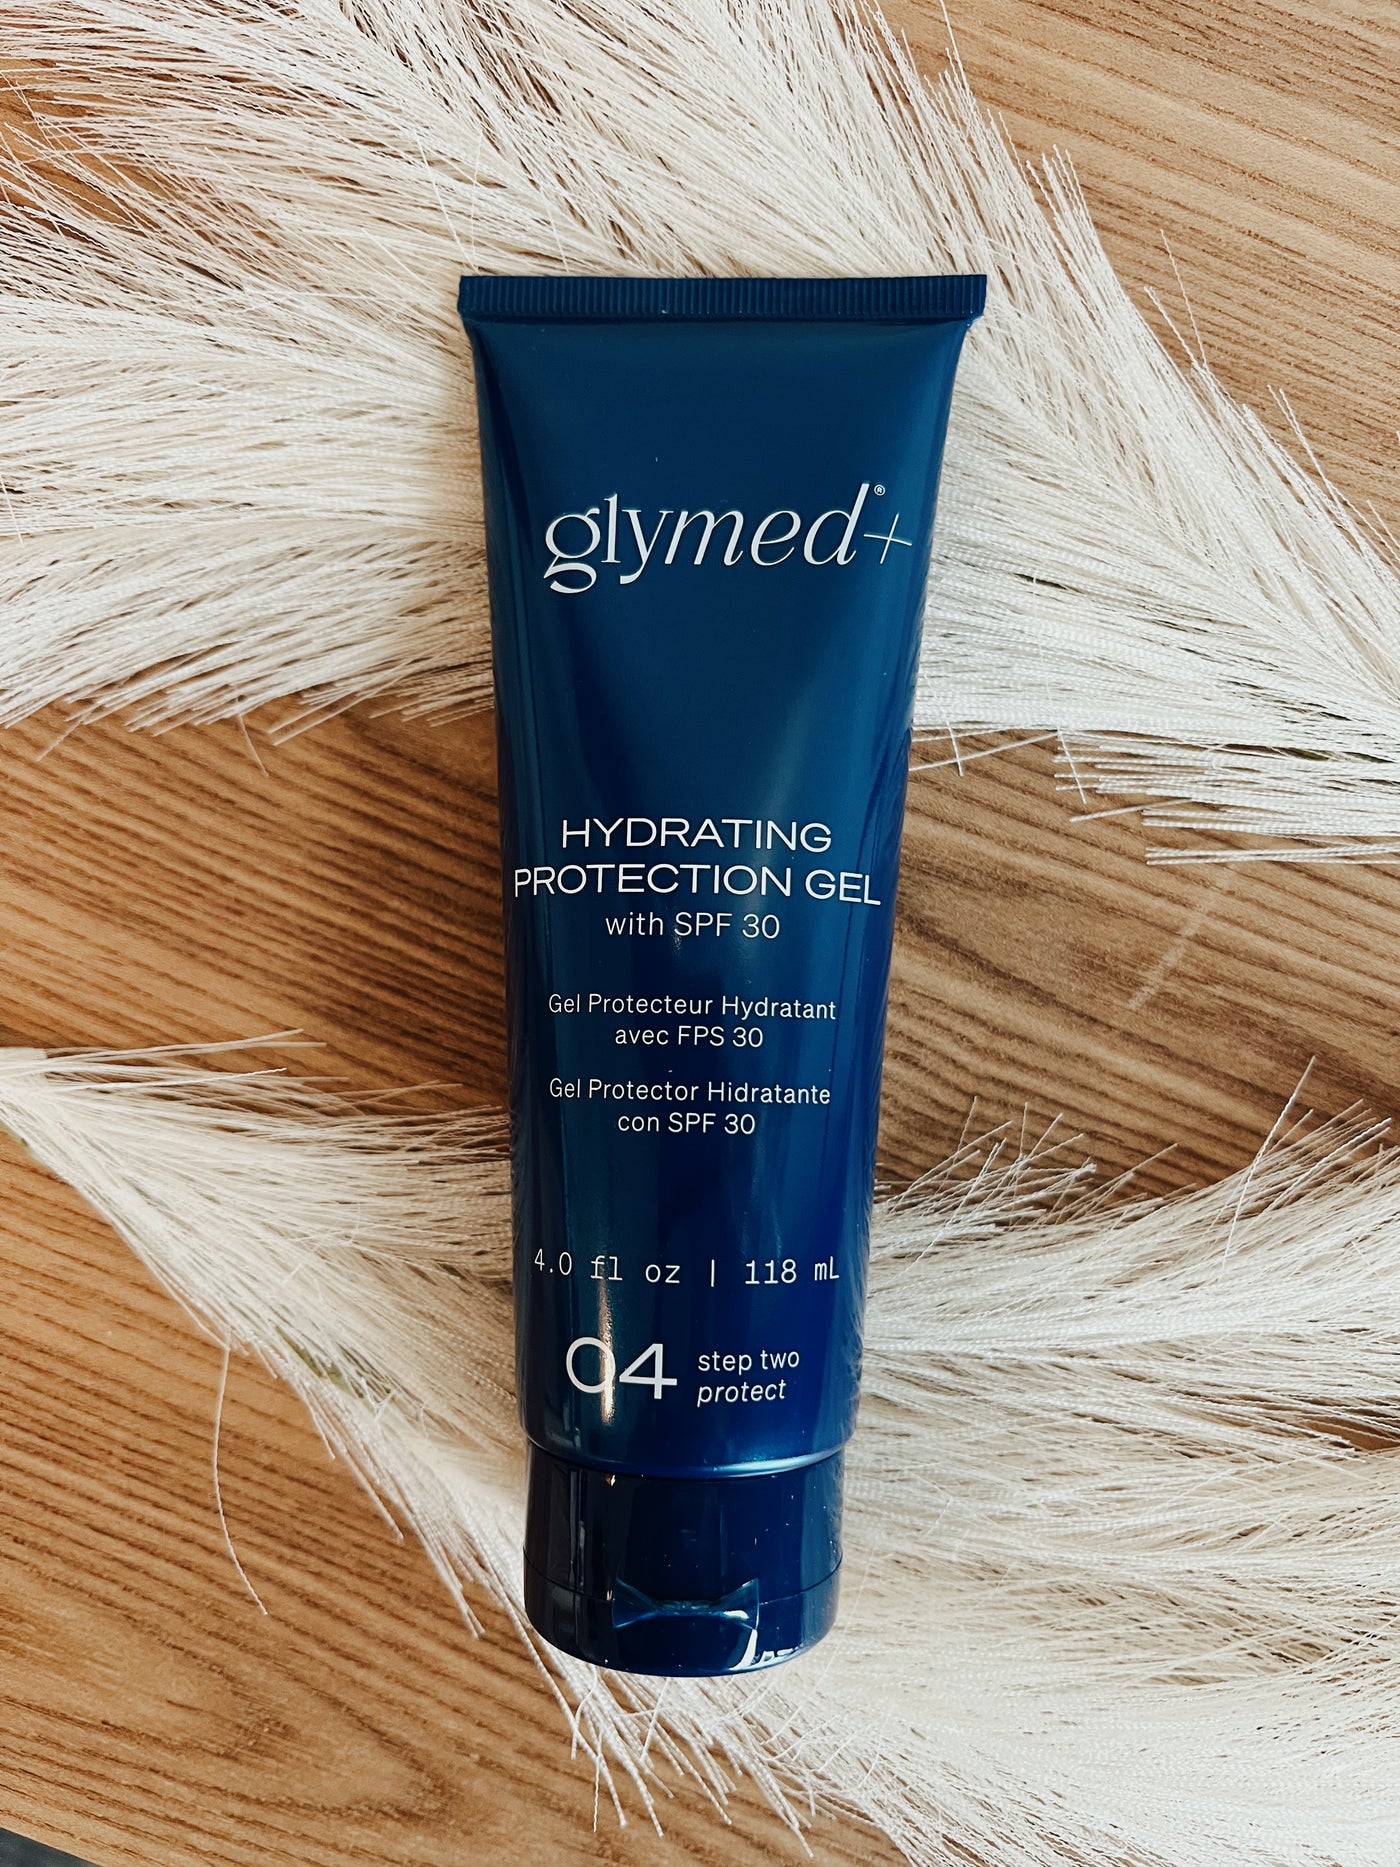 Hydrating Protection Gel with SPF 30